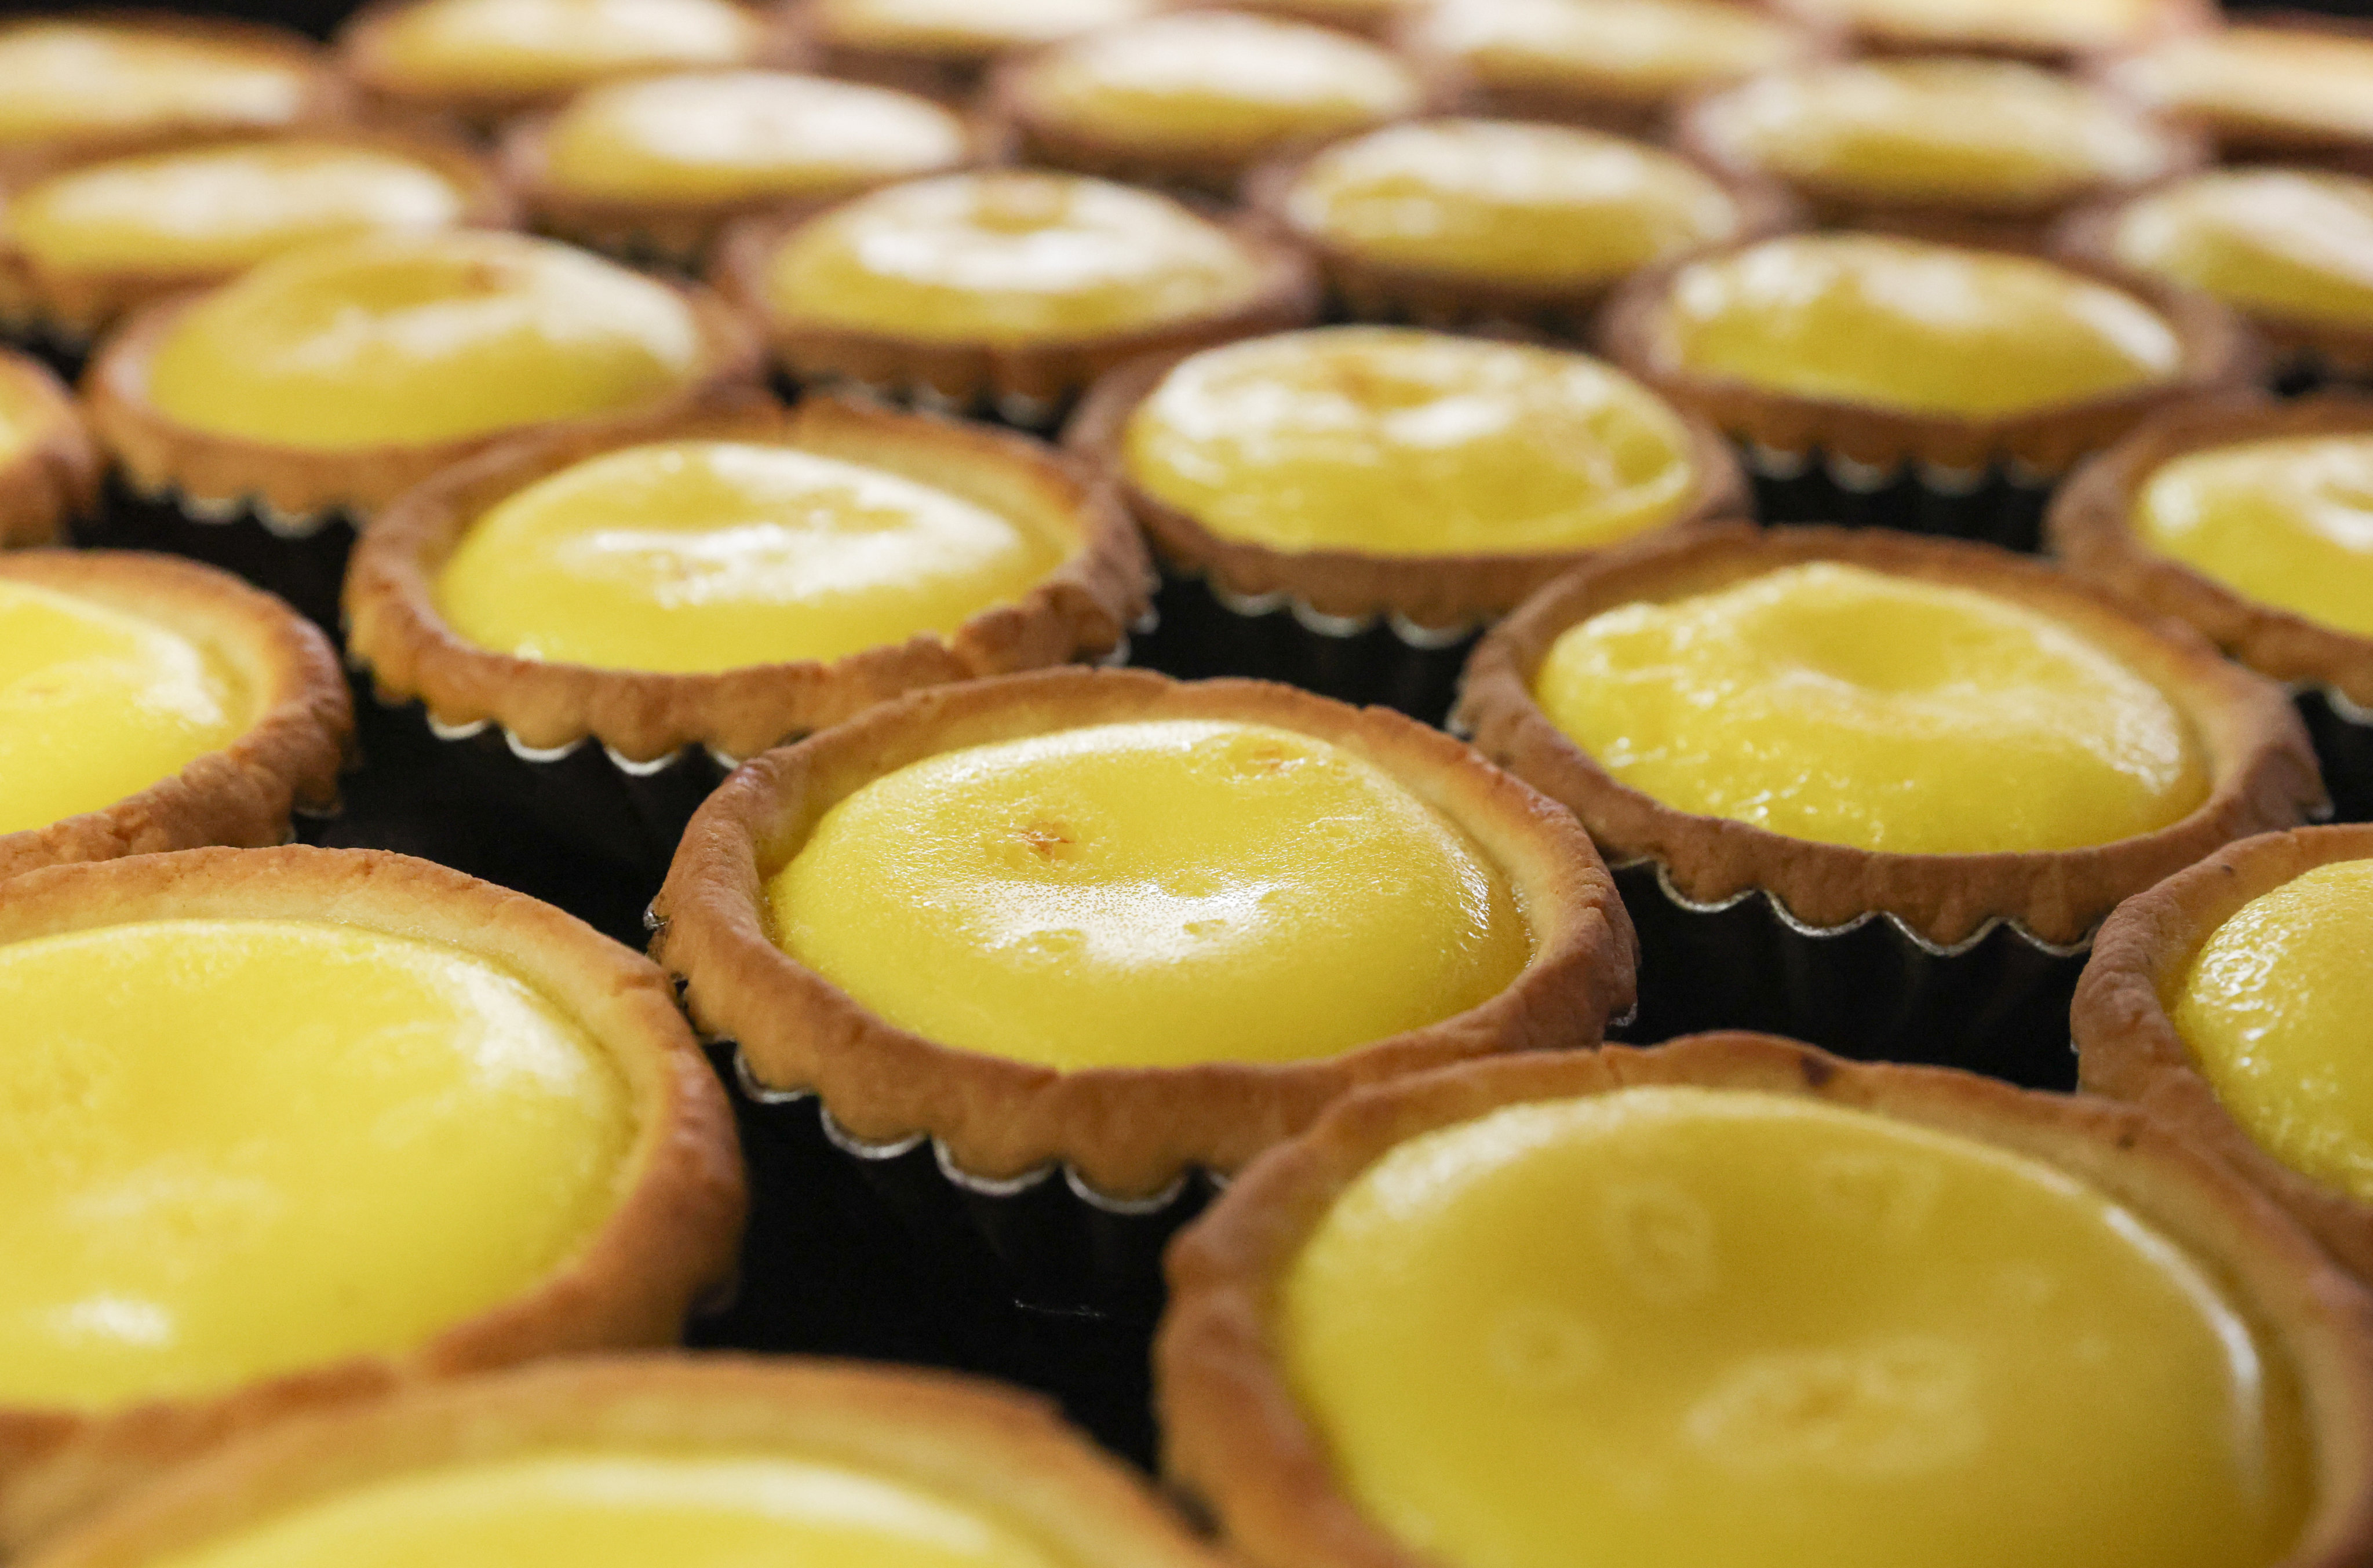 Don’t miss out on egg tarts. They are part of the culinary fabric of the city. Picture: Dickson Lee